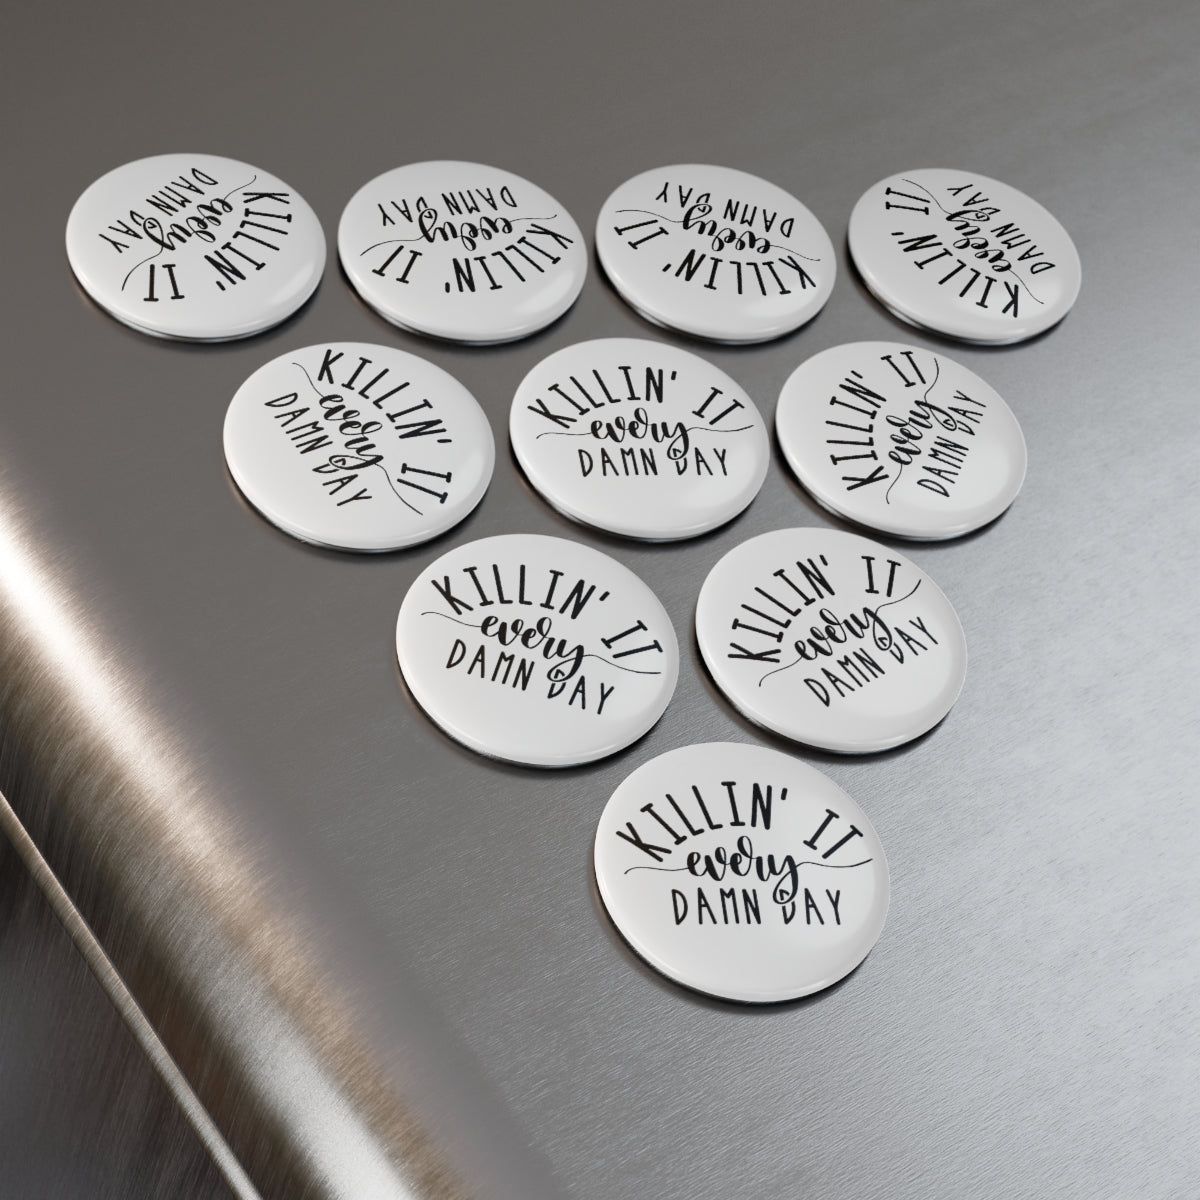 Killing it every damn day Button Magnet, Round (1 & 10 pcs)